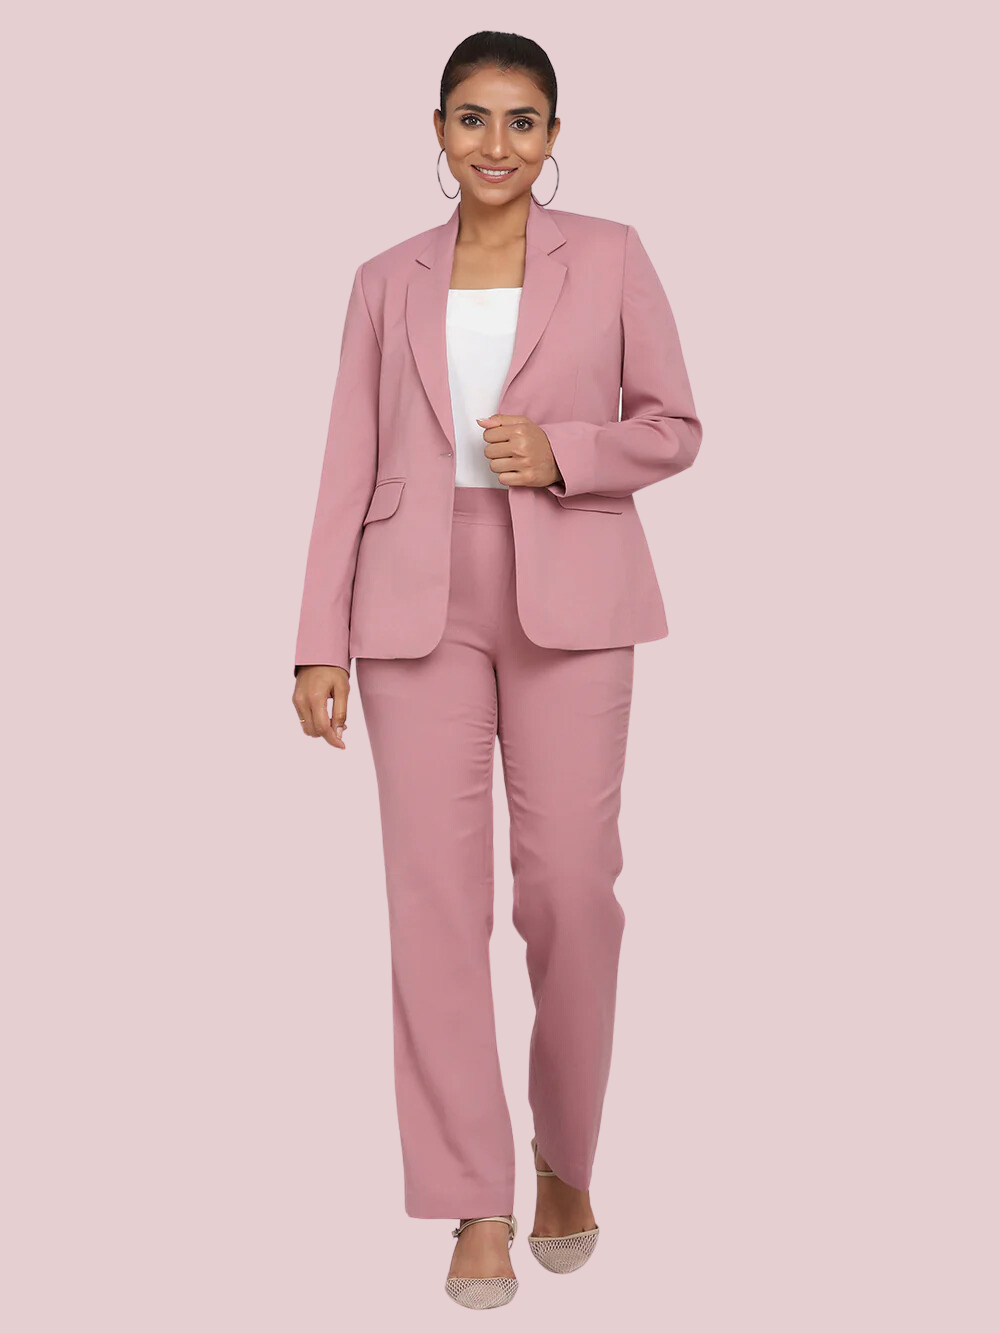 Women's Formal Poly Crepe Pant Suit - Pink | Women's Pant Suit | Power Sutra Clothing